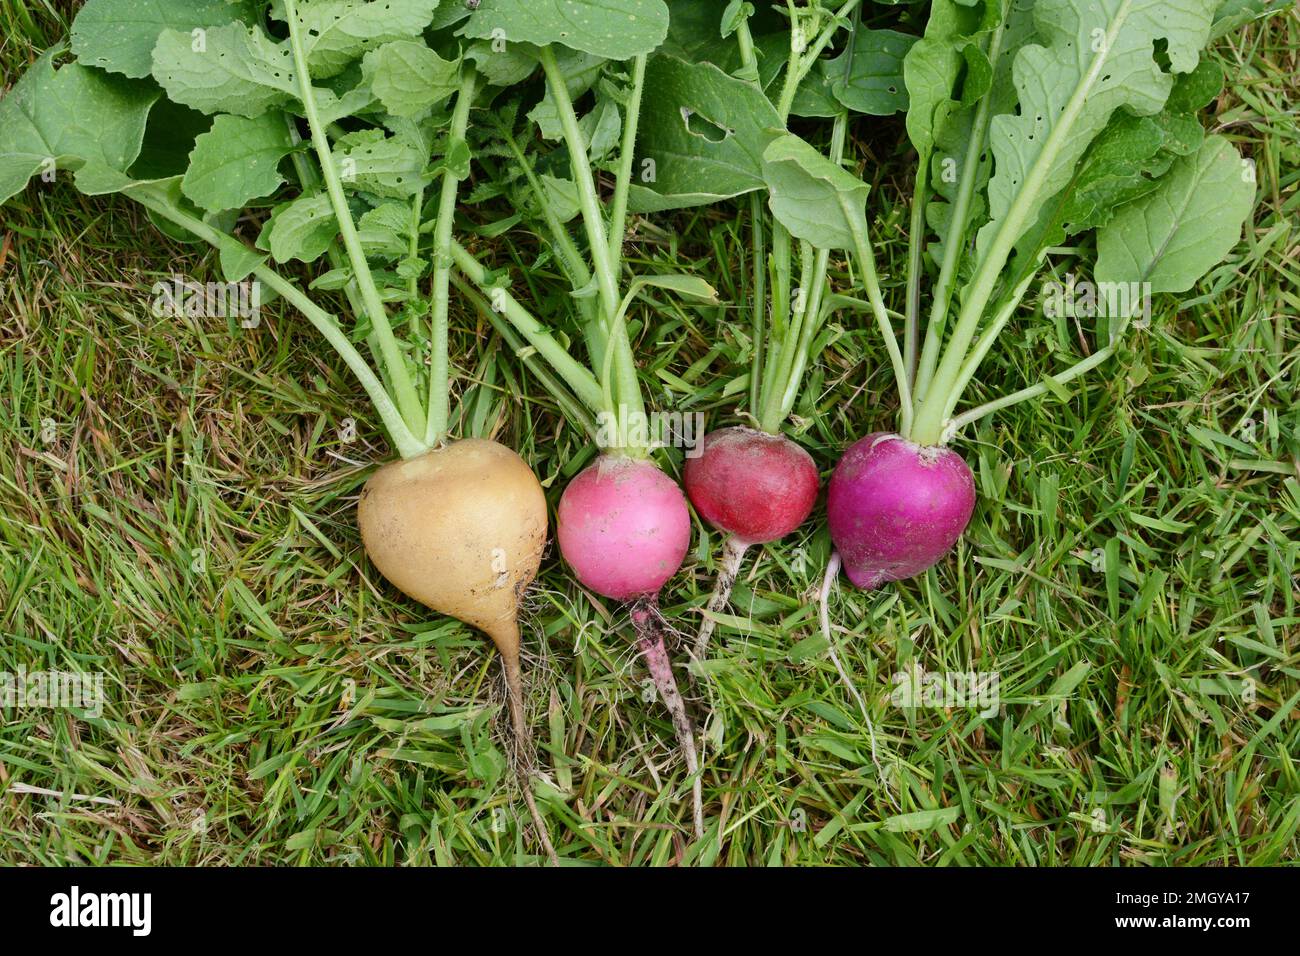 Freshly-harvested radishes on grass - rainbow variety with yellow, pink, red and purple skins, and green foliage Stock Photo